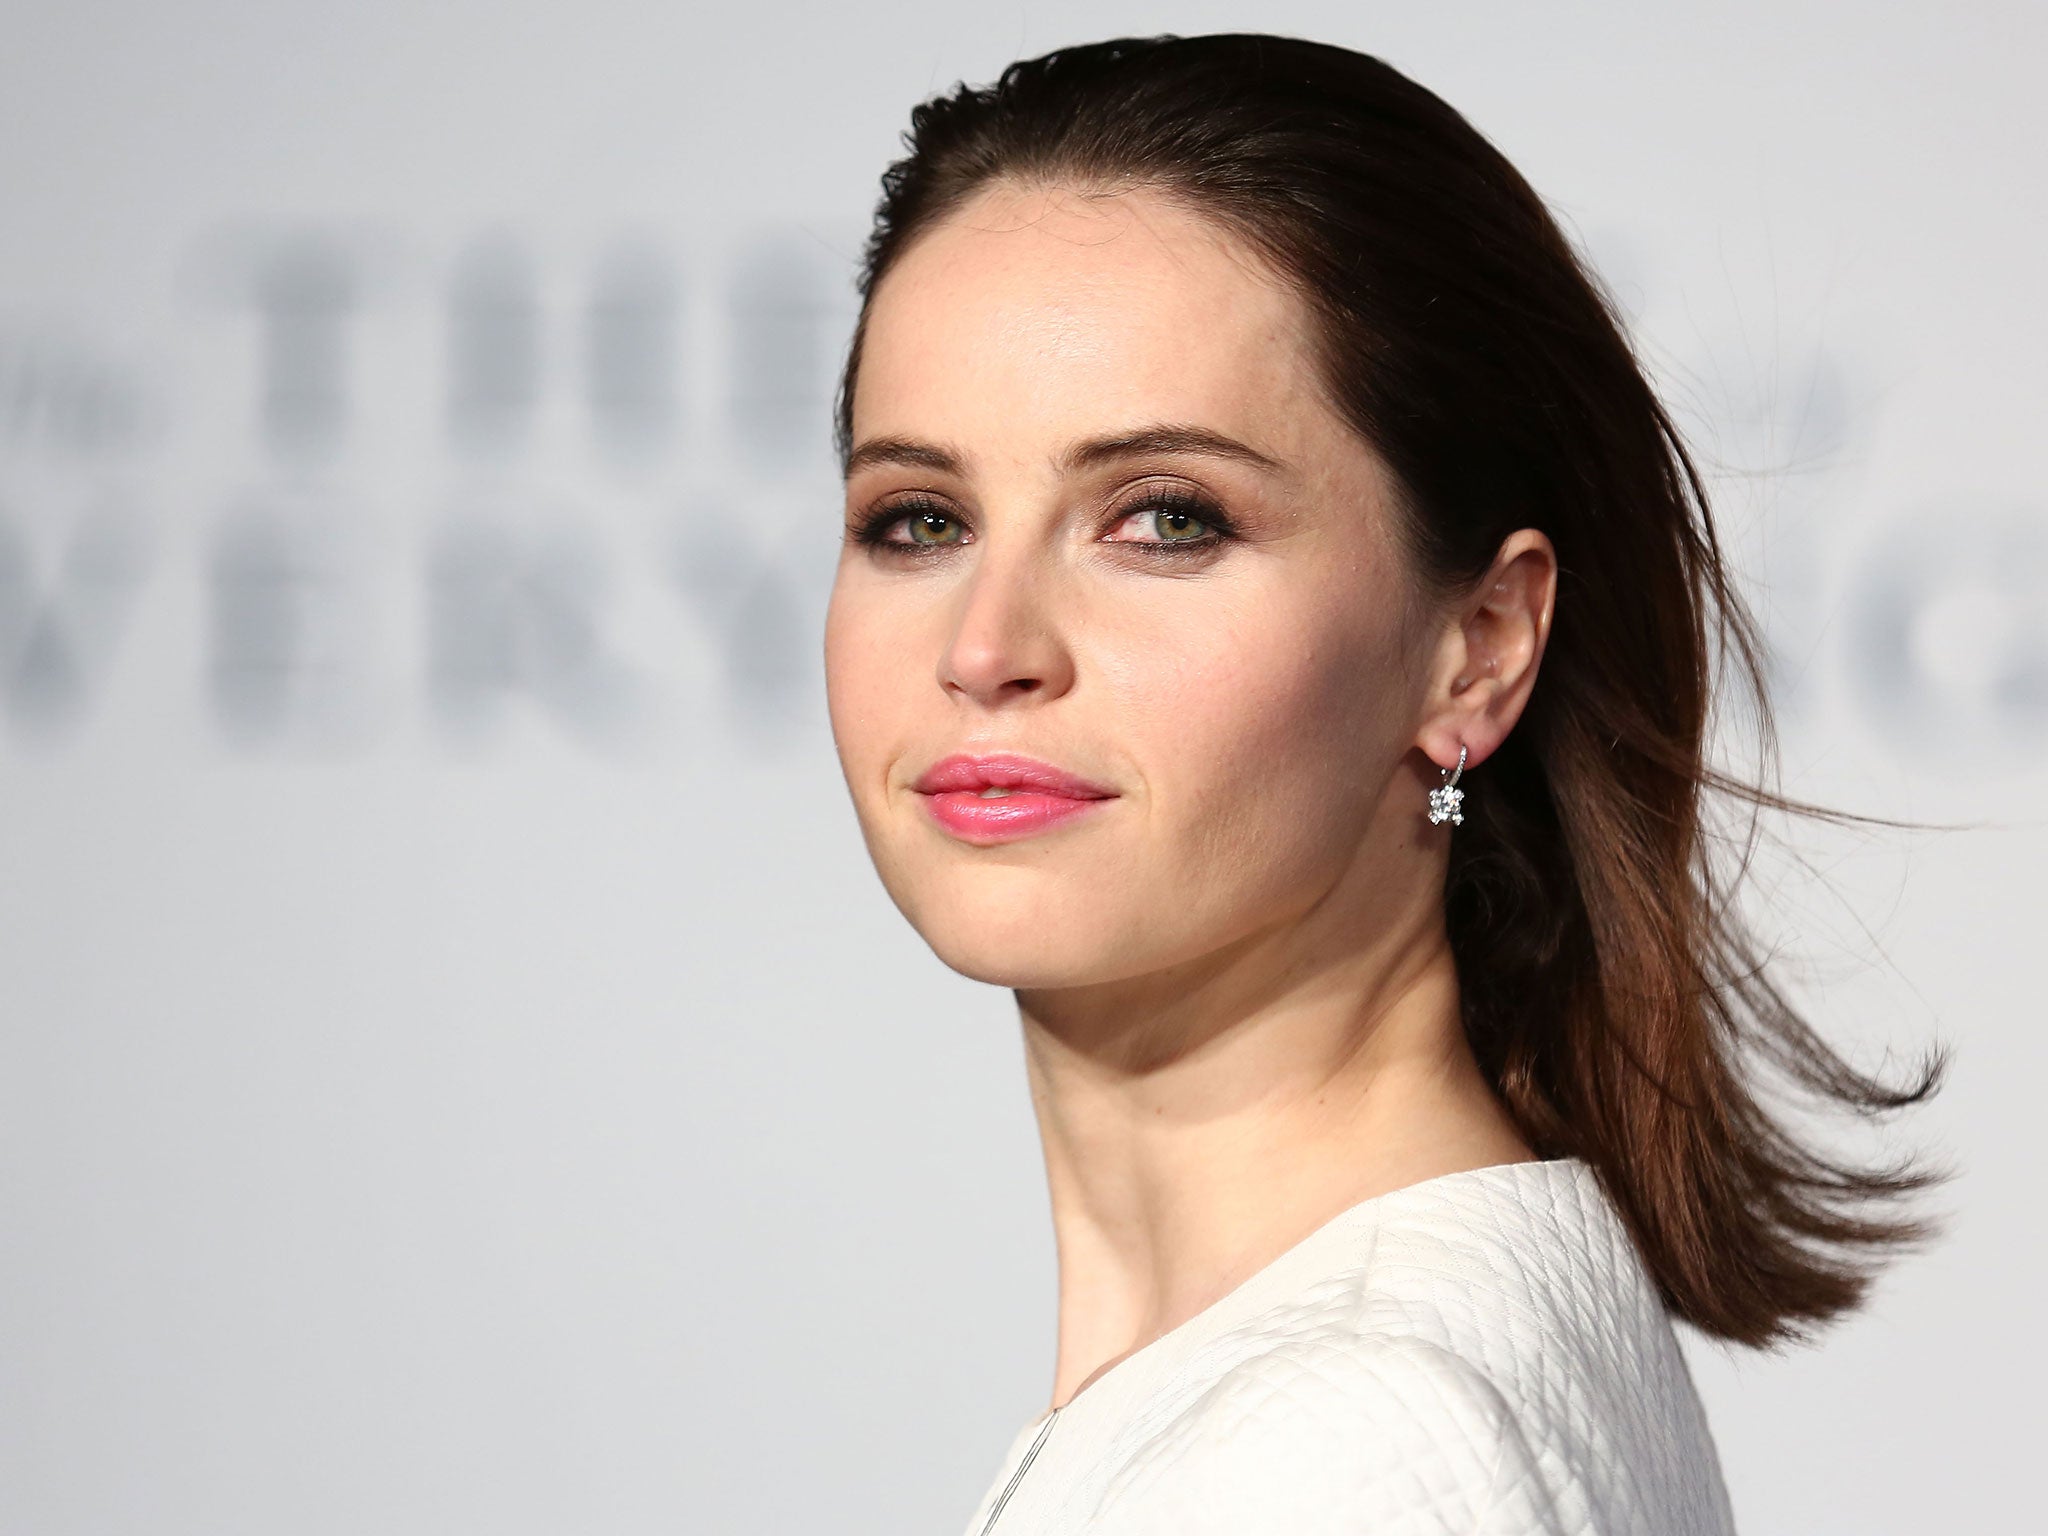 Oscar-nominated actress Felicity Jones is in talks to play the female lead in a Star Wars spin-off